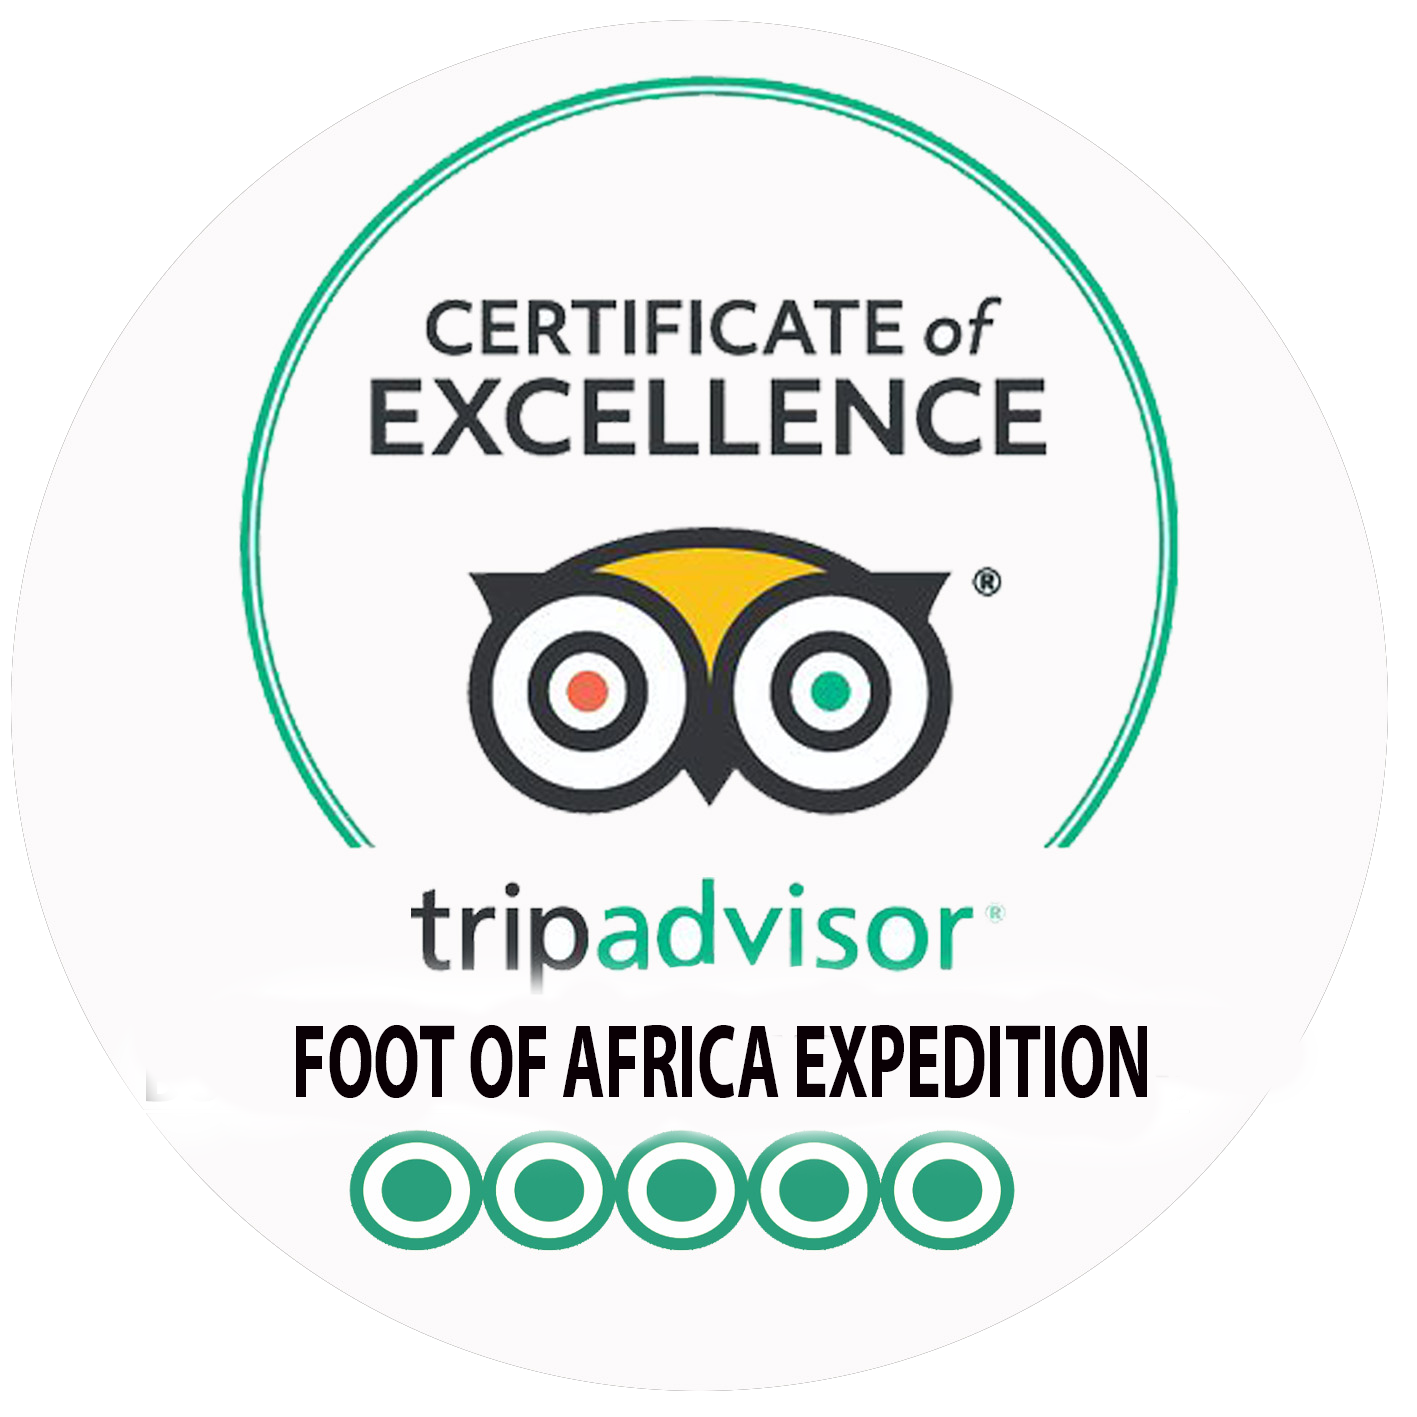 FOOT OF AFRICA EXPEDITION